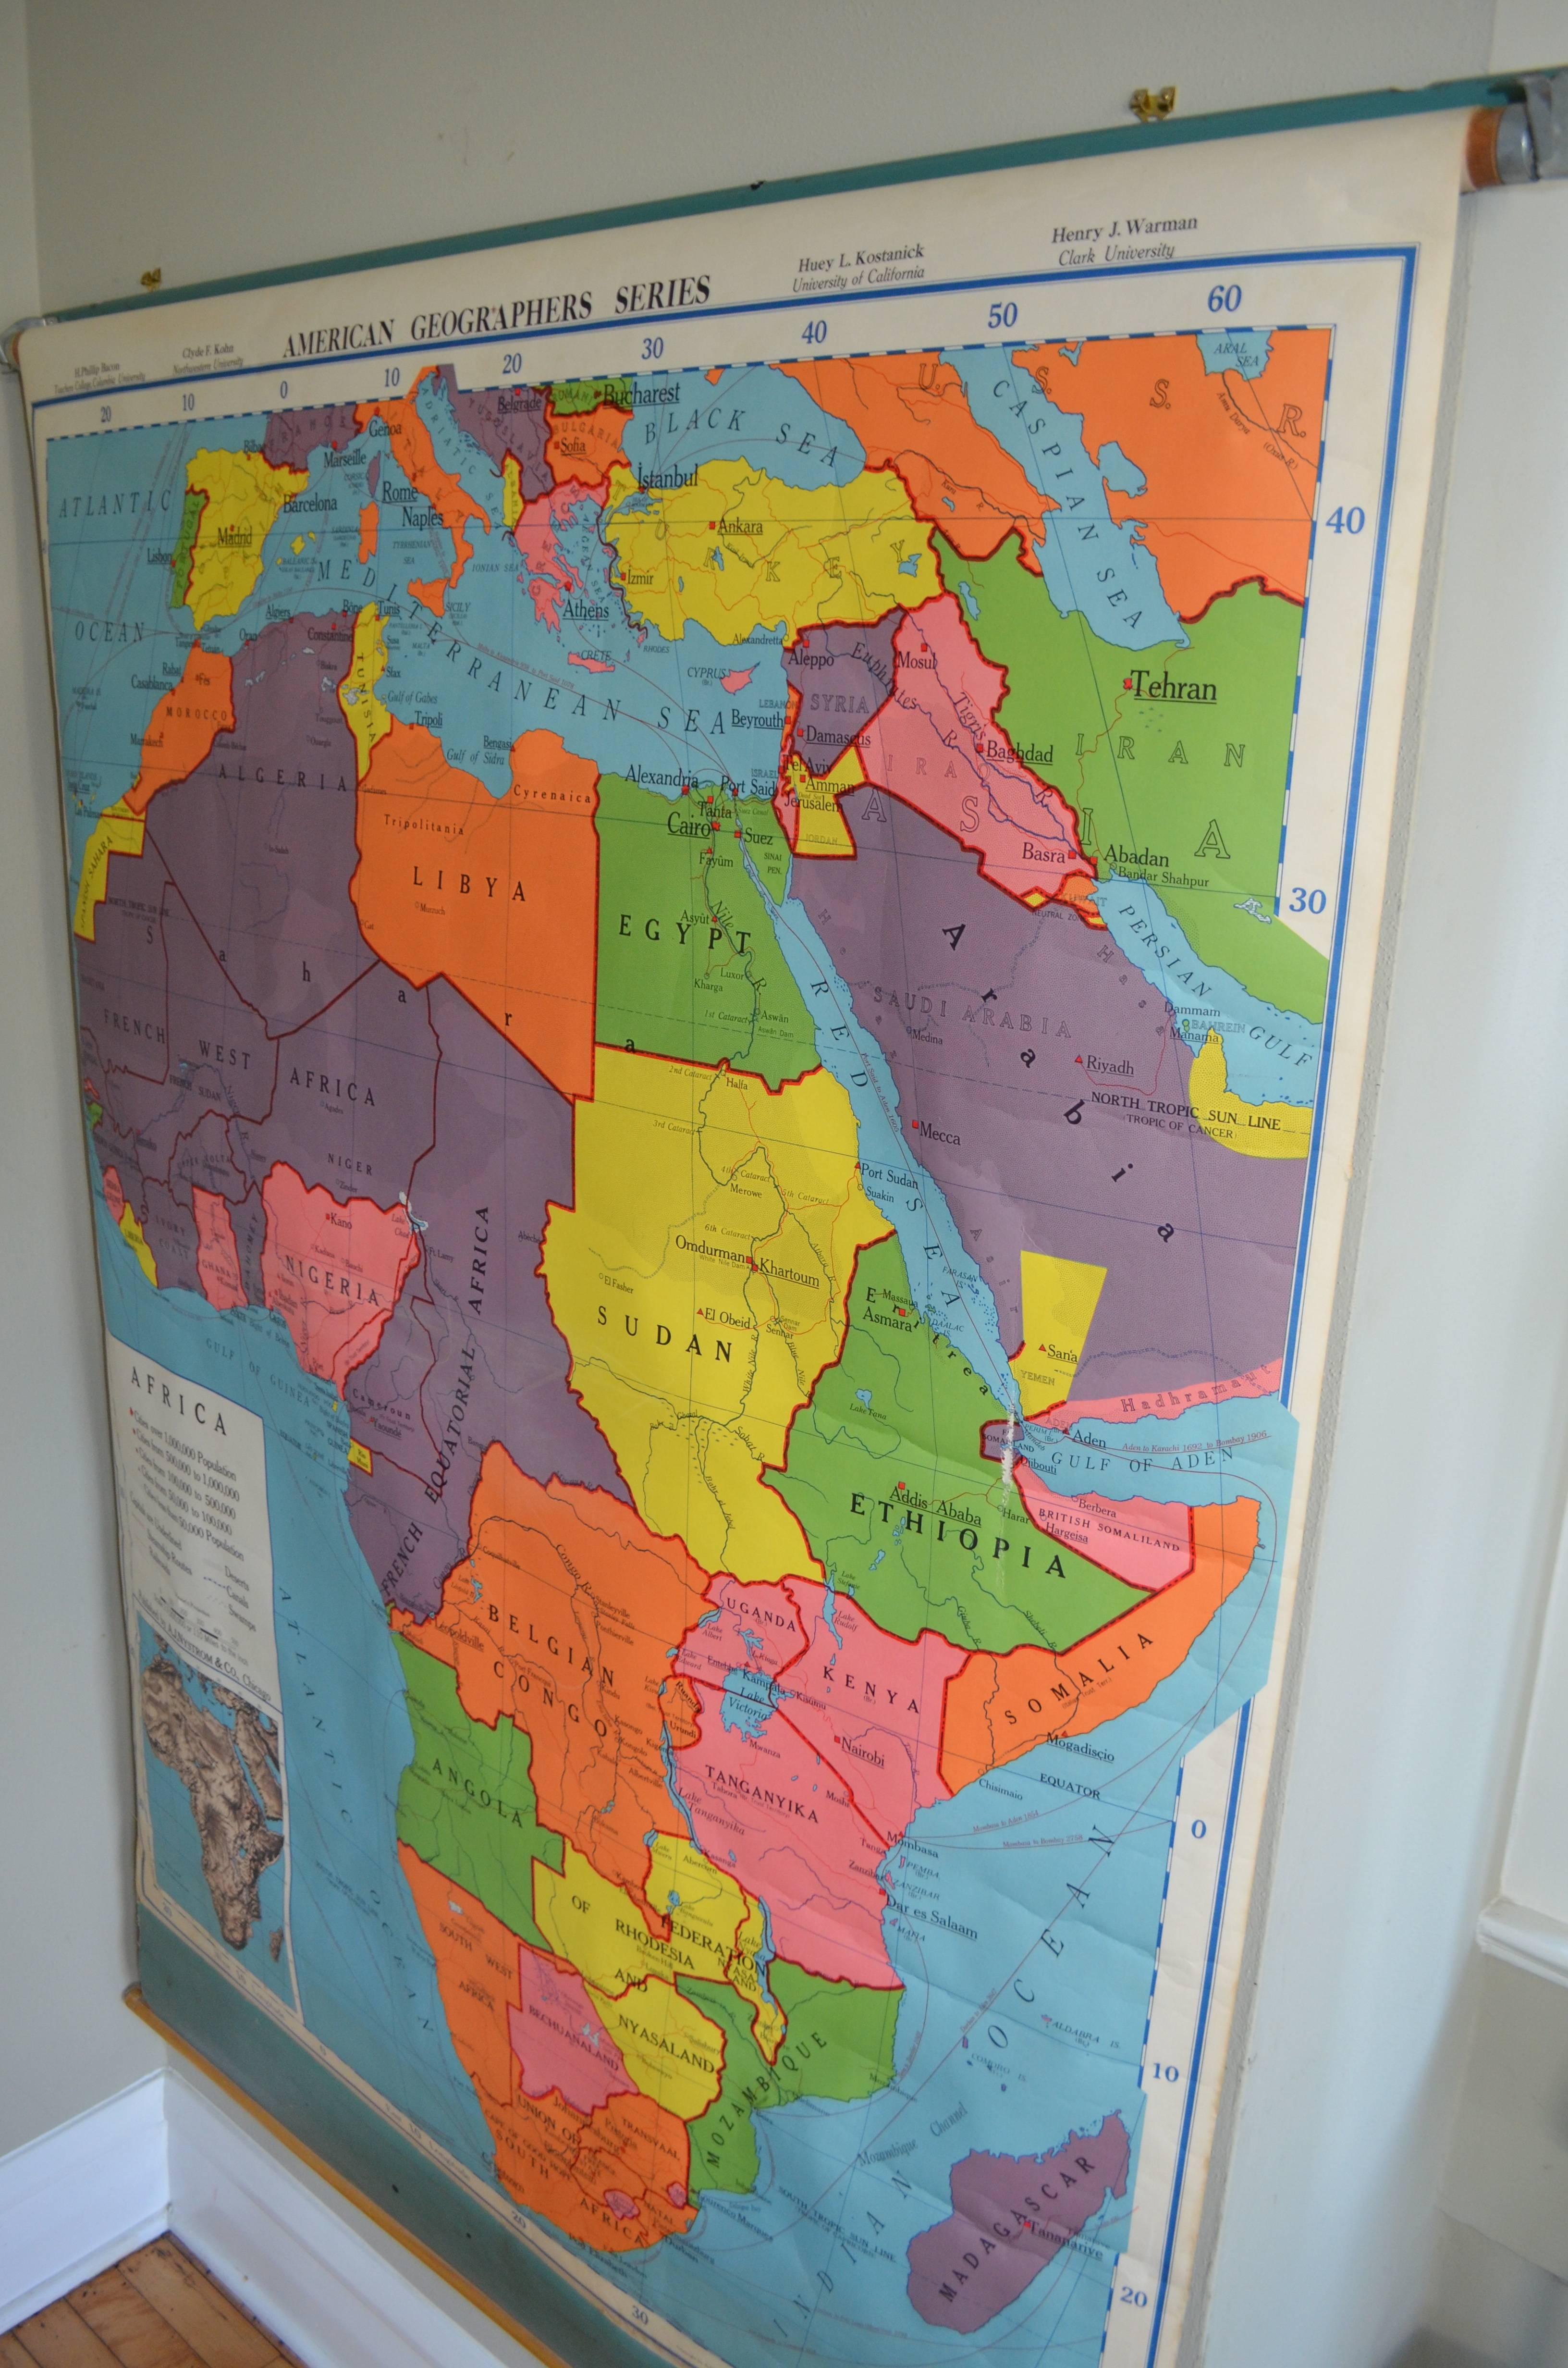 Hardwood Schoolroom Geography Map of Africa, 1957 Edition